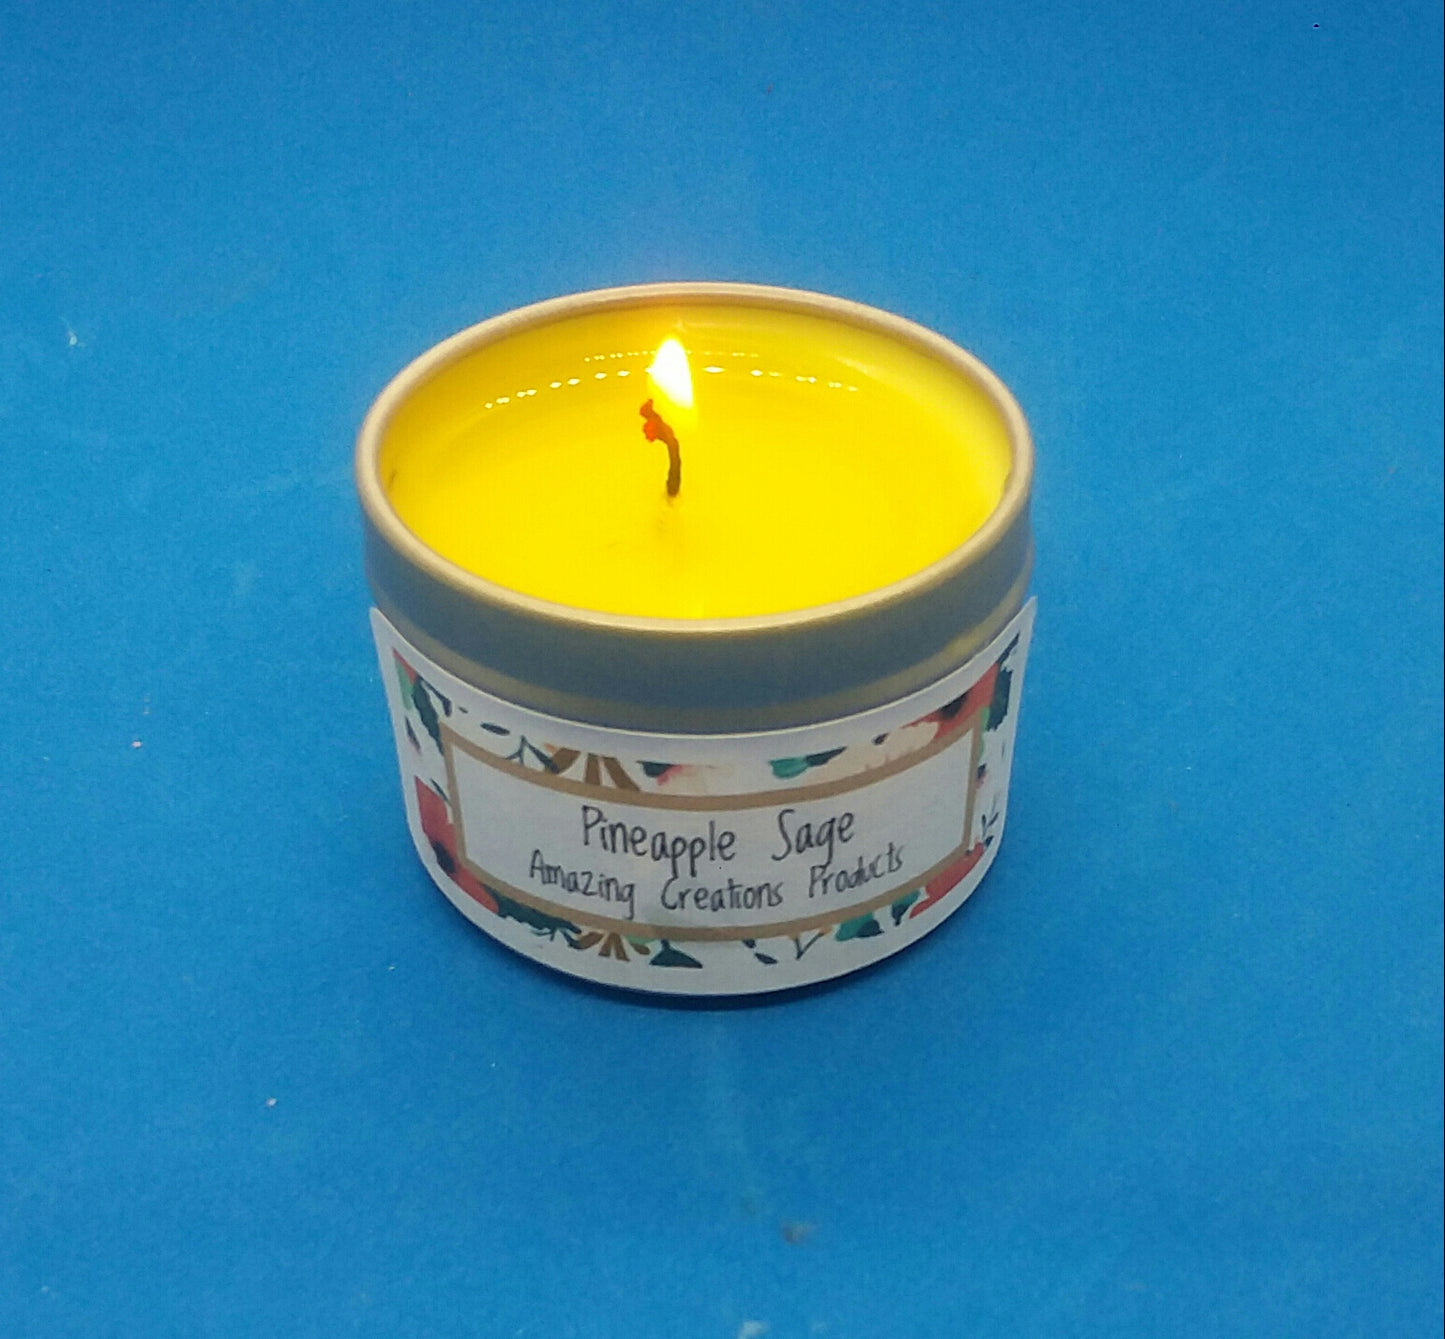  Pineapple Sage Candle - Candles available at Amazing Creations Products . Grab yours for $5.00 today!